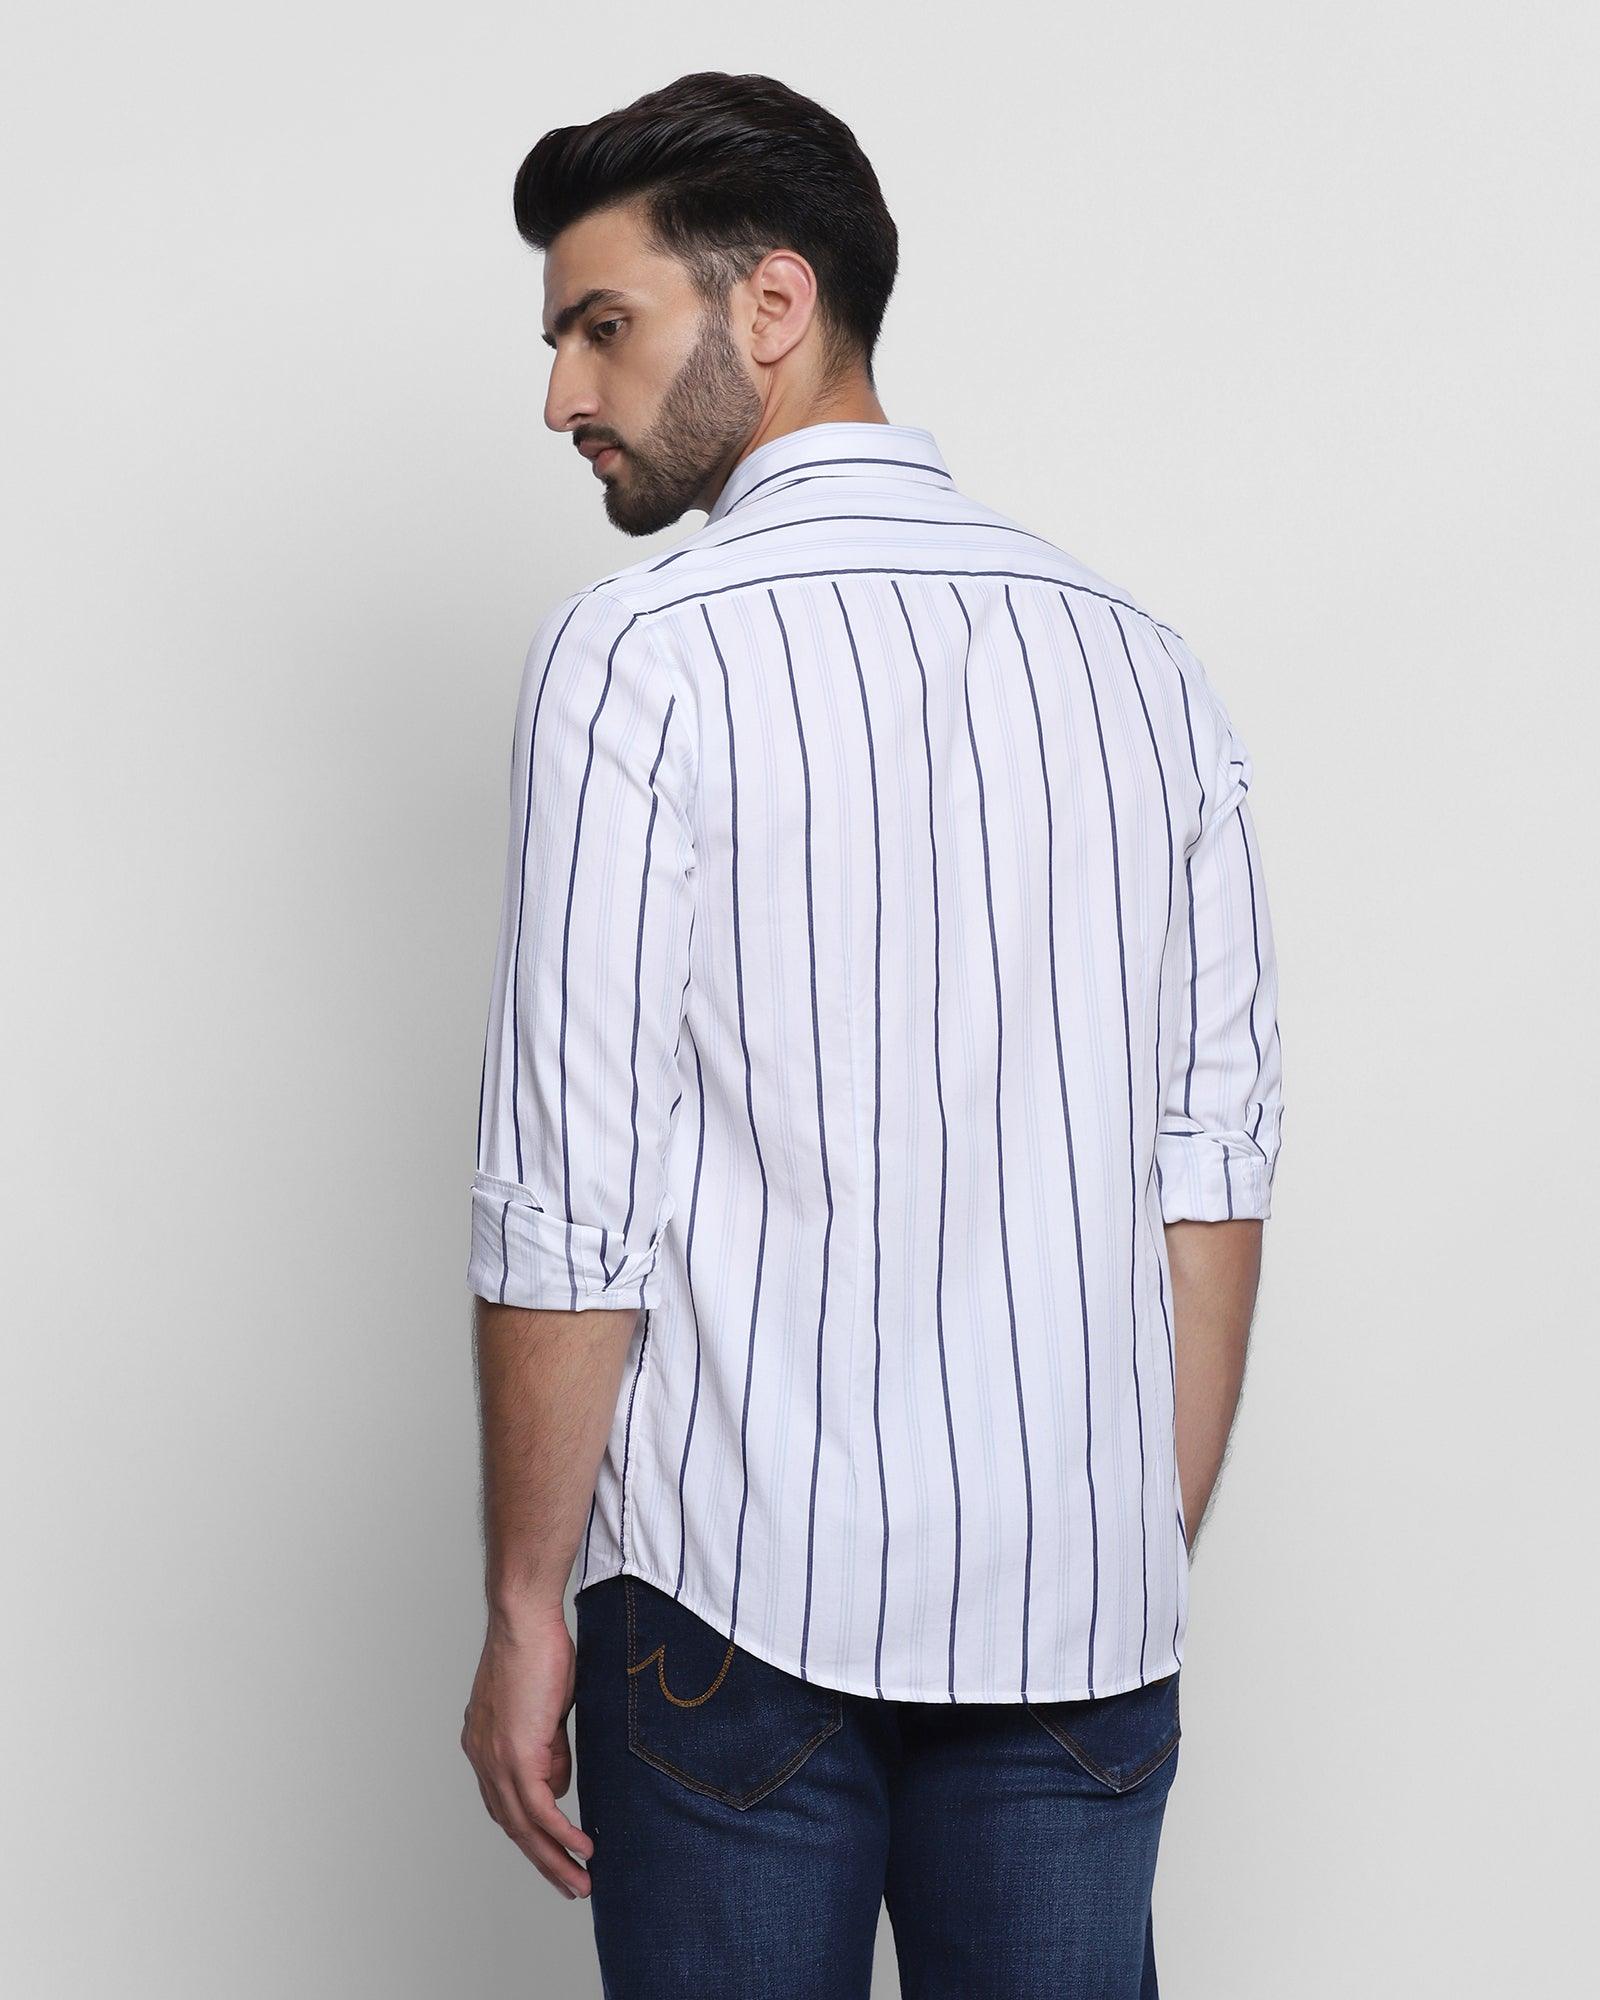 Casual White Striped Shirt - Play